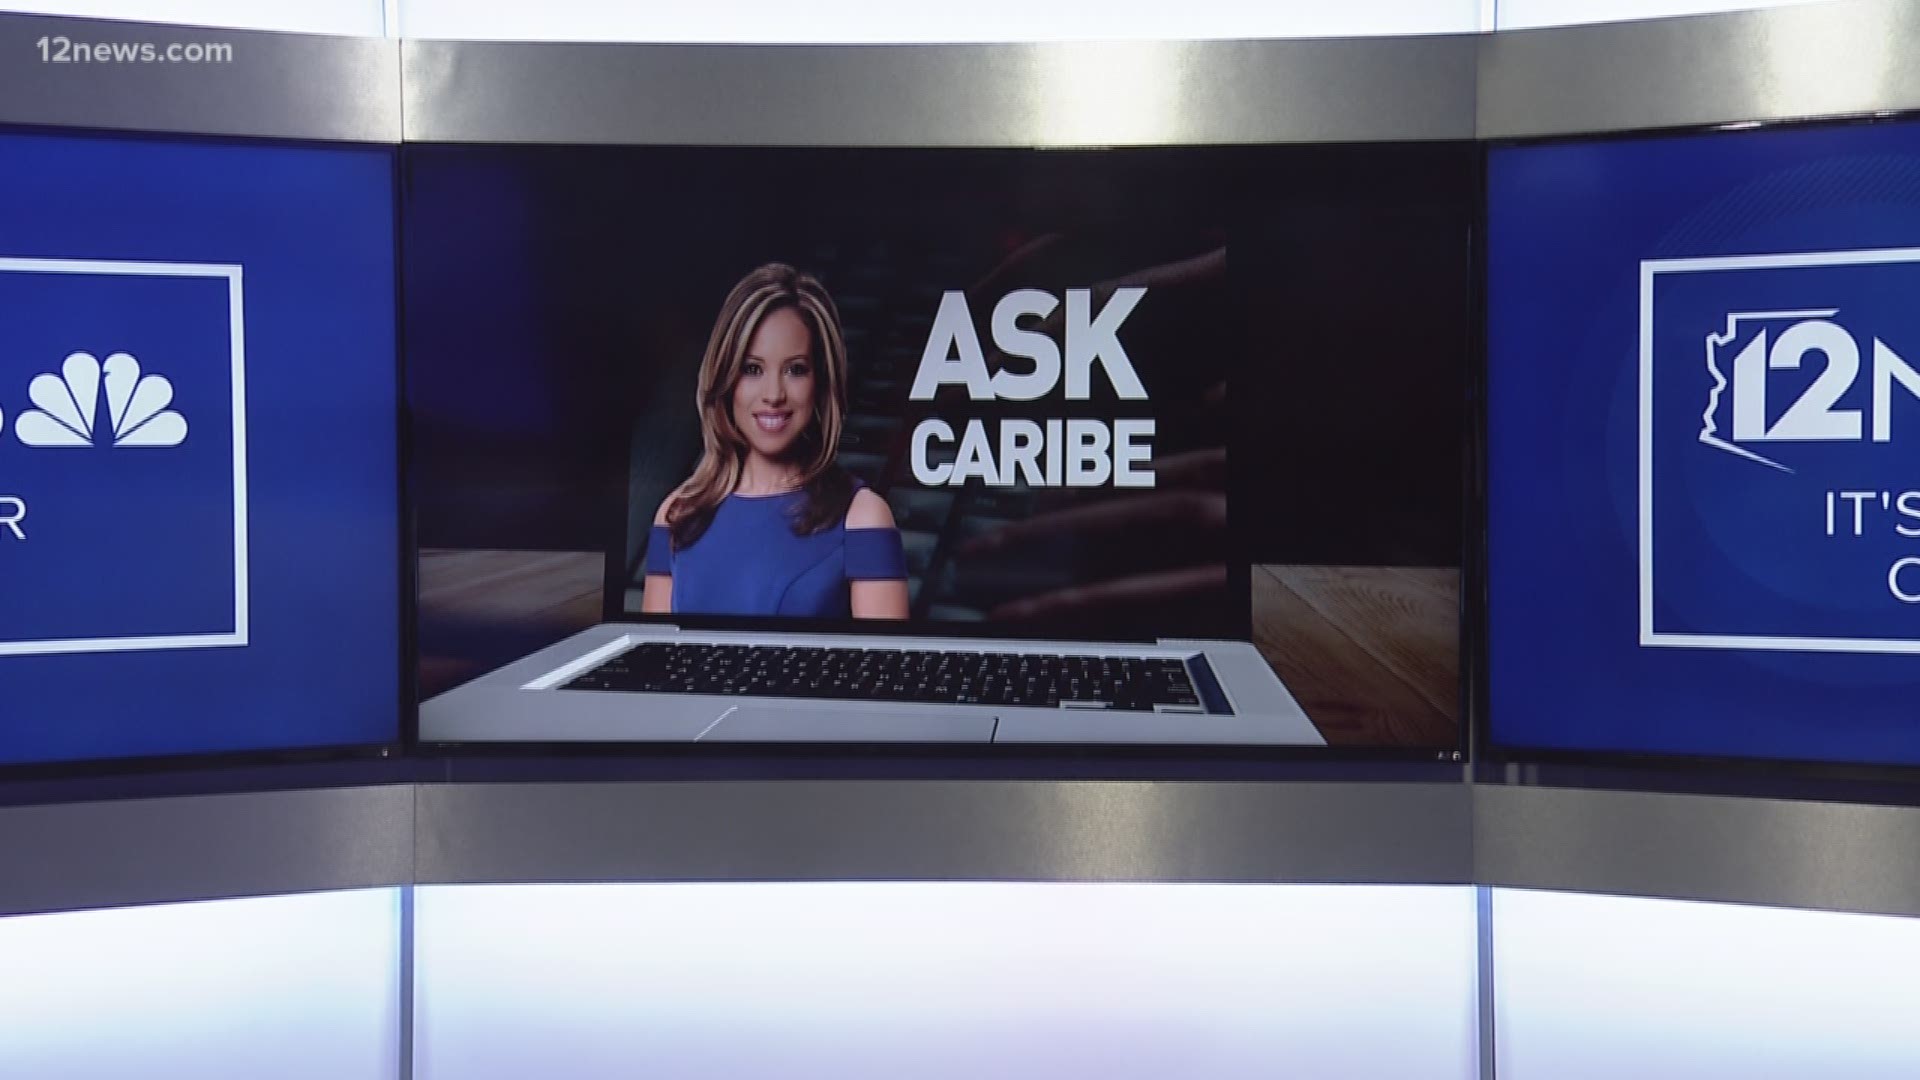 When Mark is gone why does Caribe get all the questions during this segment? Well, that changes today! Check out what Mike gets asked and his answer.